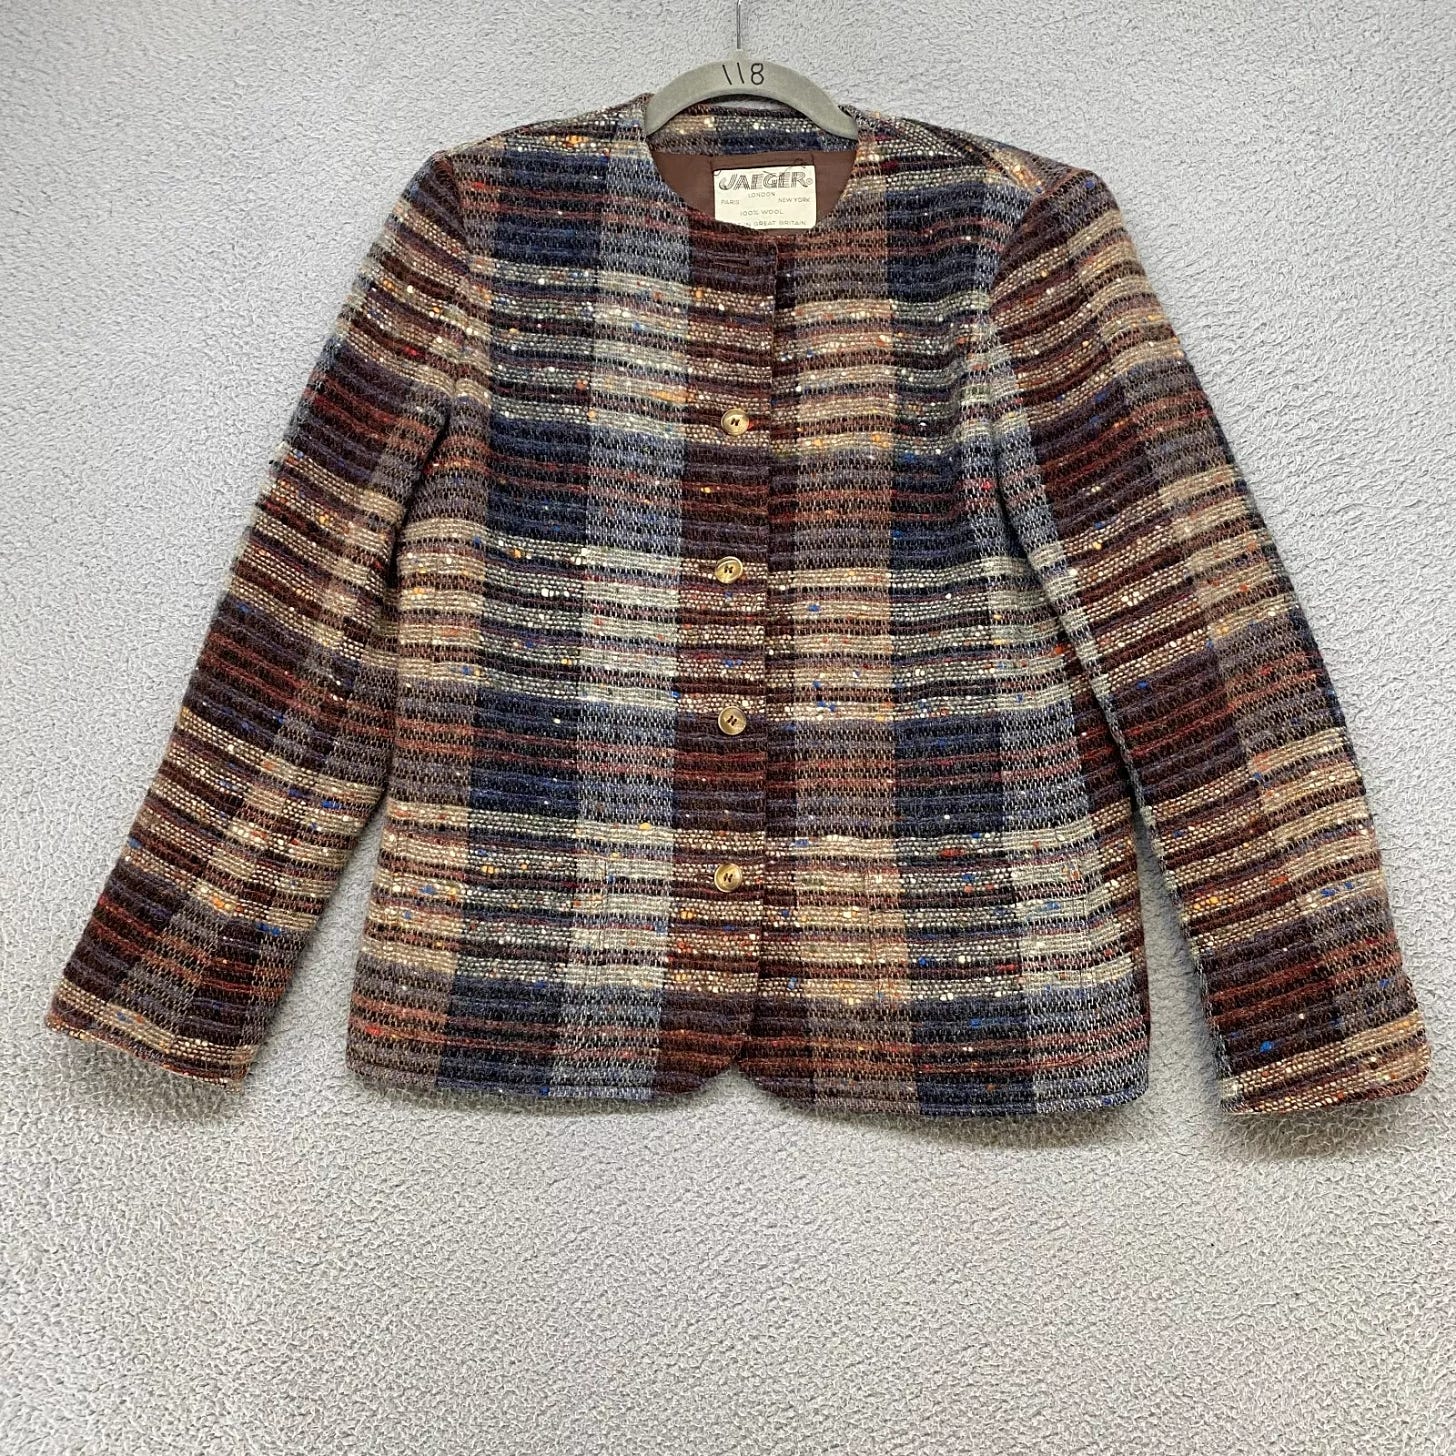 Jaegar Wool Jacket Womens 10 Brown Plaid 90s Lined Tweed Button Front Vintage - Picture 1 of 14